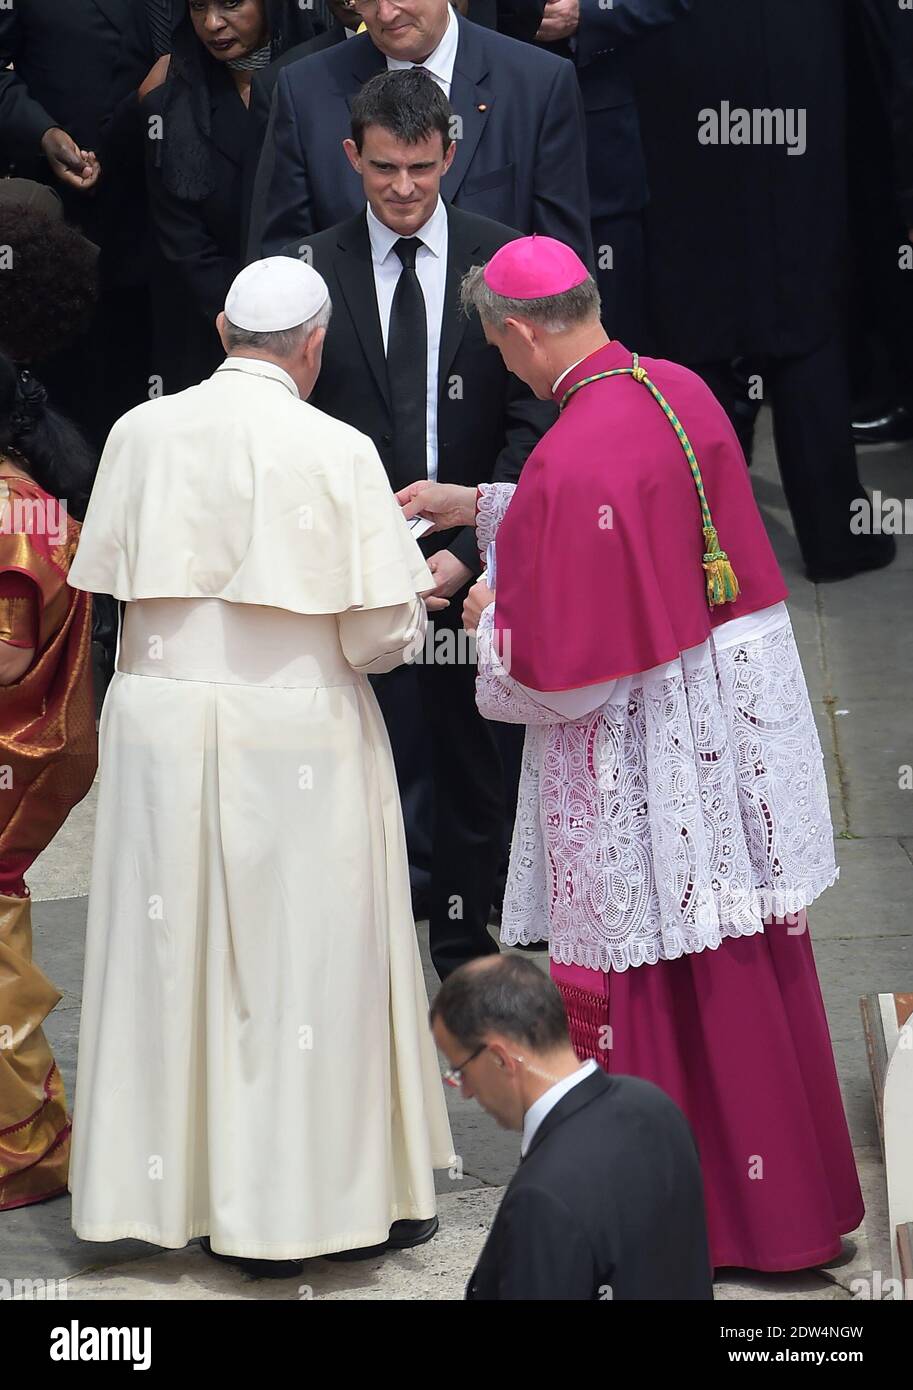 French Prime Minister Manuel Valls and pope Francis at the end of the ceremony of canonisation of popes John Paul II and John XXIII at the Vatican on April 27, 2014. Photo by Eric Vandeville/ABACAPRESS.COM Stock Photo